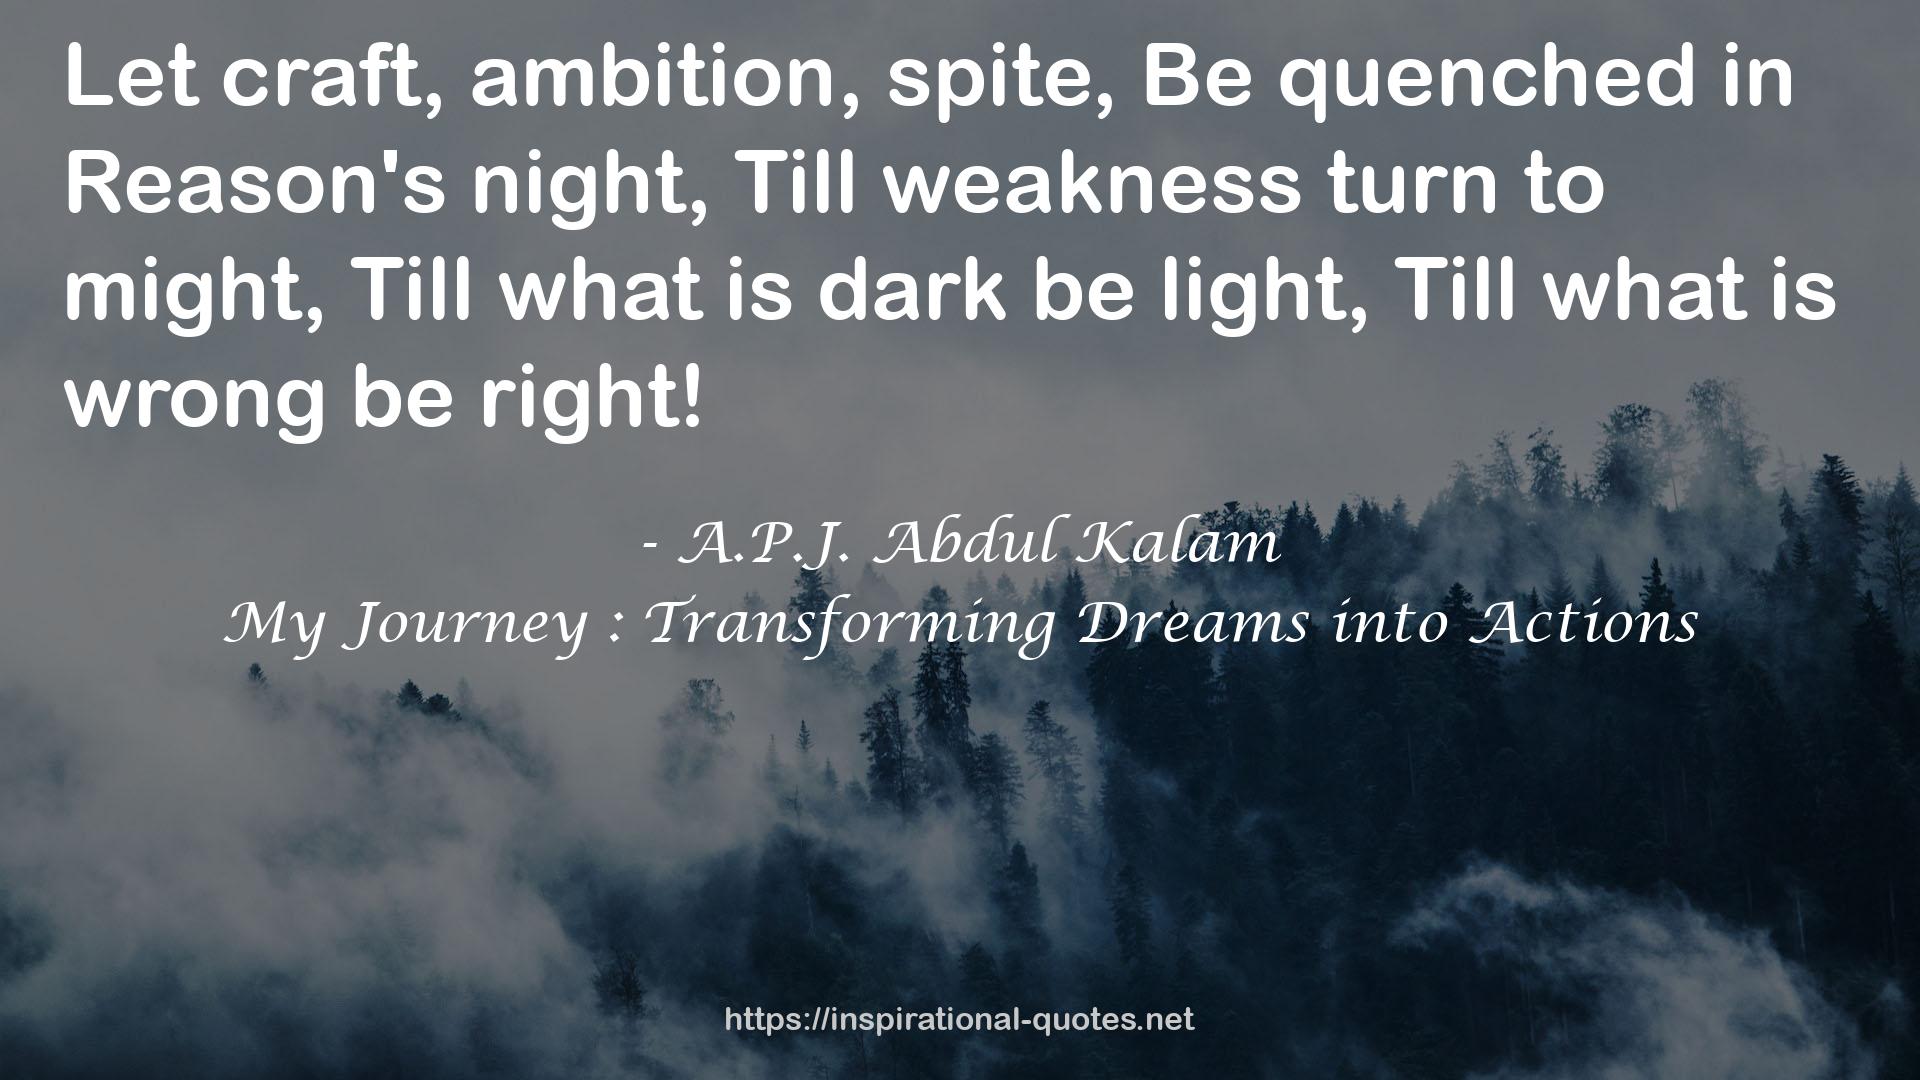 My Journey : Transforming Dreams into Actions QUOTES